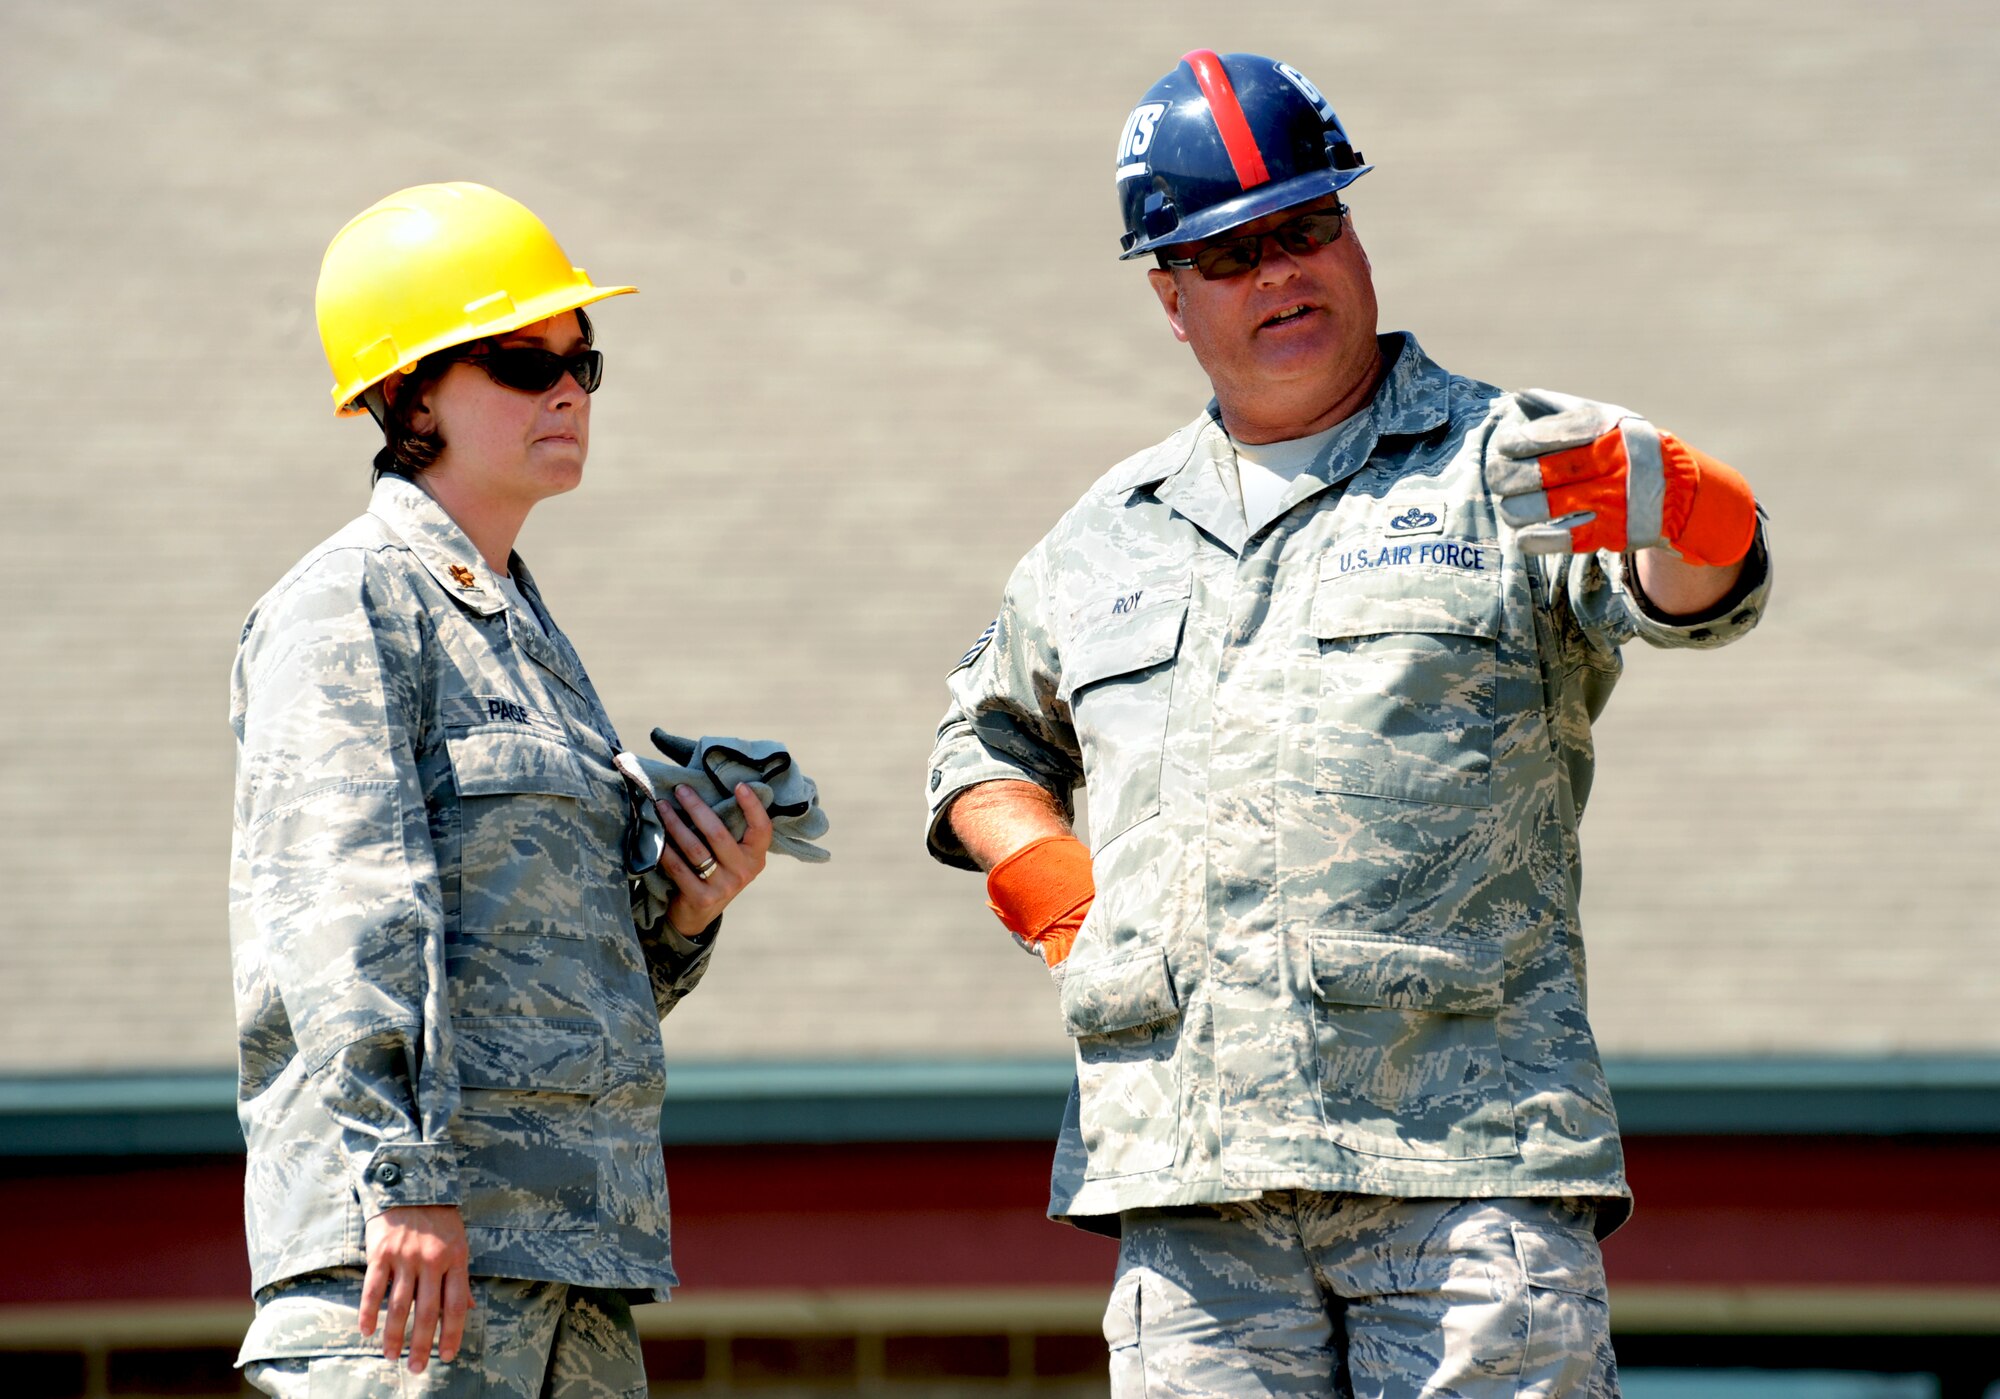 Oregon Air National Guard Senior Master Sgt. Jeff Roy, 142nd Civil Engineer Squadron, points out the progress of the Jeff Lucas Veterans Memorial Stadium to Major Mededith Page, acting Commander of the 142nd CES during the two weeks of work the 142nd CES spent building the new sports complex. (U.S. Air Force photograph by Tech. Sgt. John Hughel, 142nd Public Affairs)